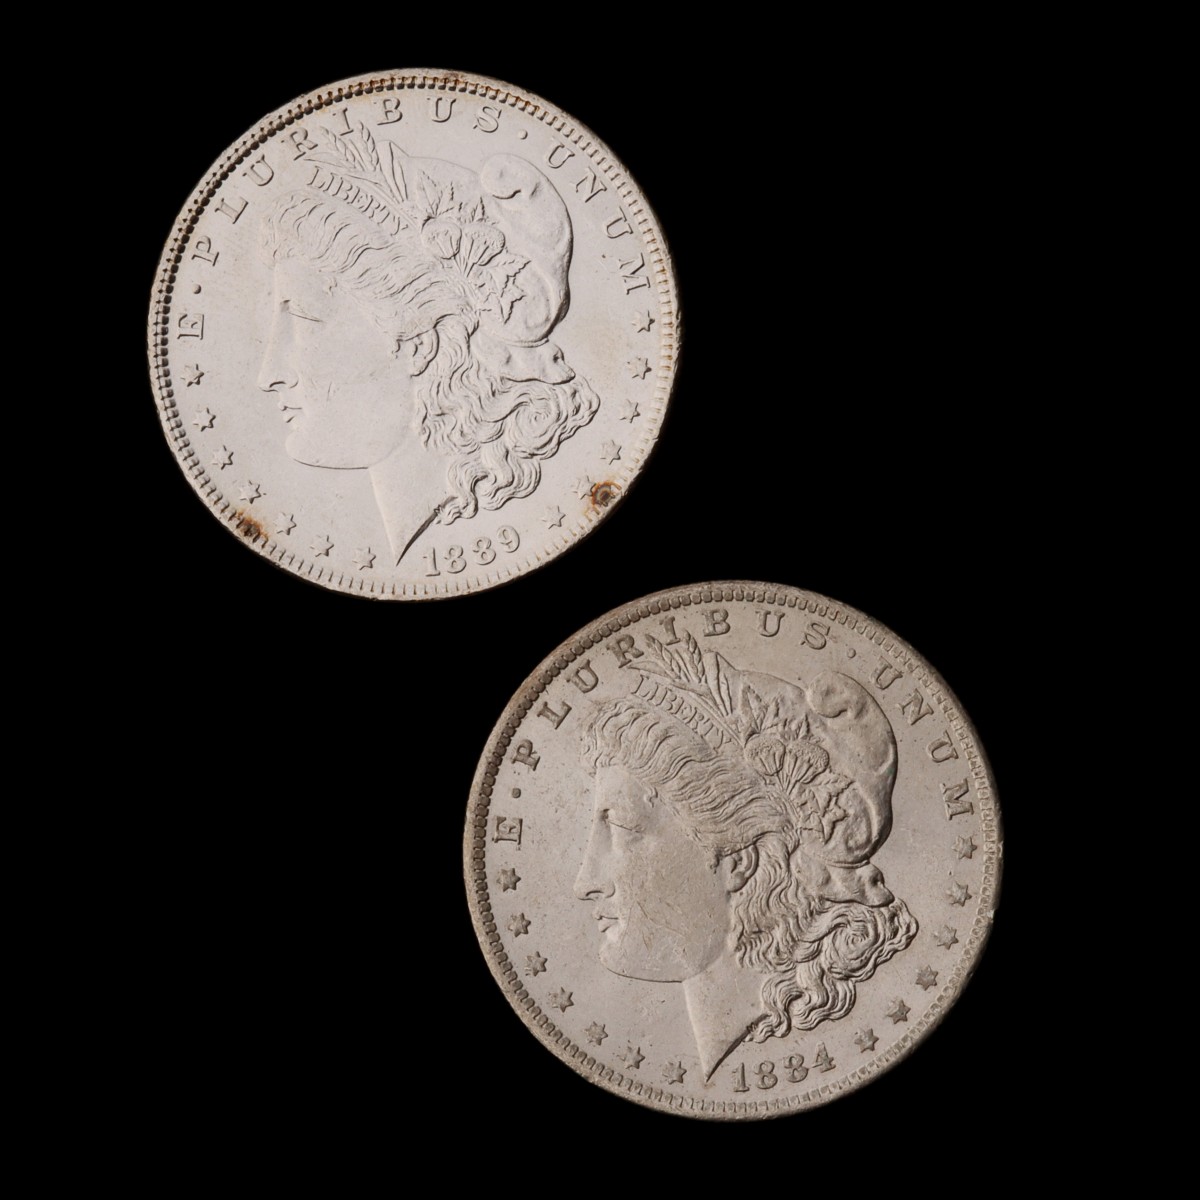 TWO HIGHER GRADE MORGAN SILVER DOLLARS, 1884-O AND 1889